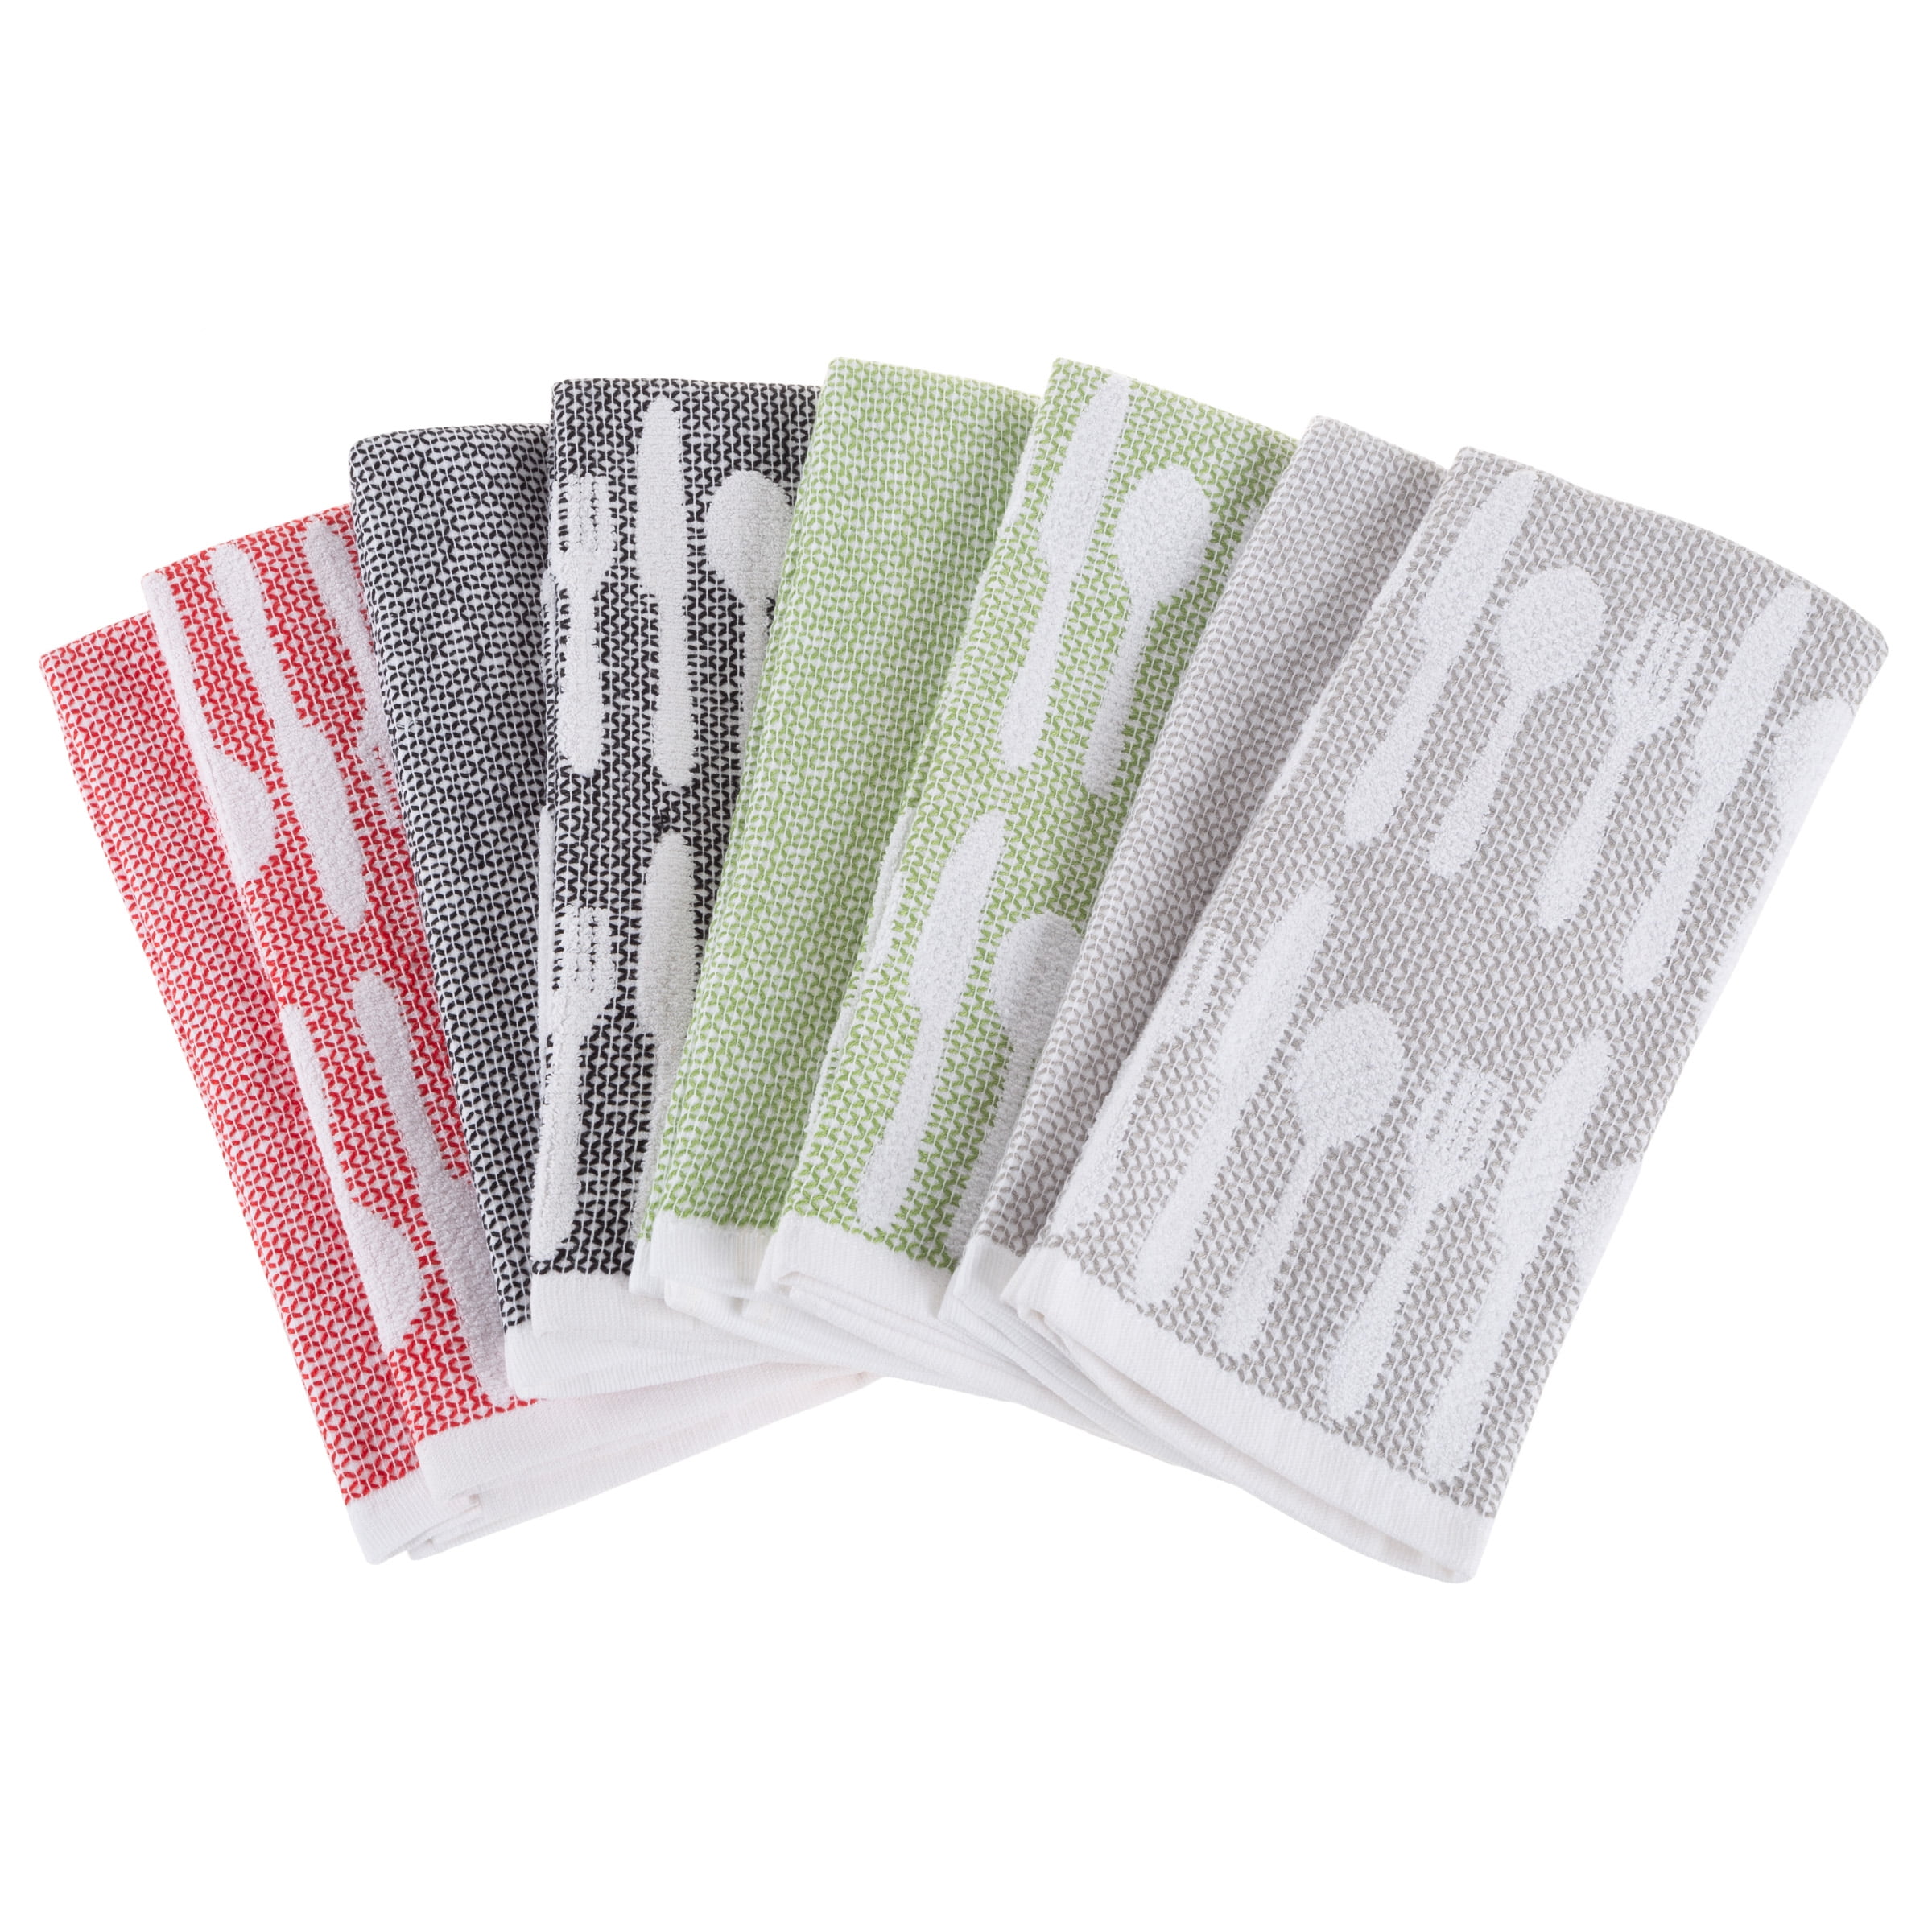 Kitchen Dish Towels- Set Of 8- 16”x28”-absorbent 100% Cotton Hand Towel- kitchen Icon Design In 4 Colors & 4 Solid Dishtowels For Drying By Lavish  Home : Target